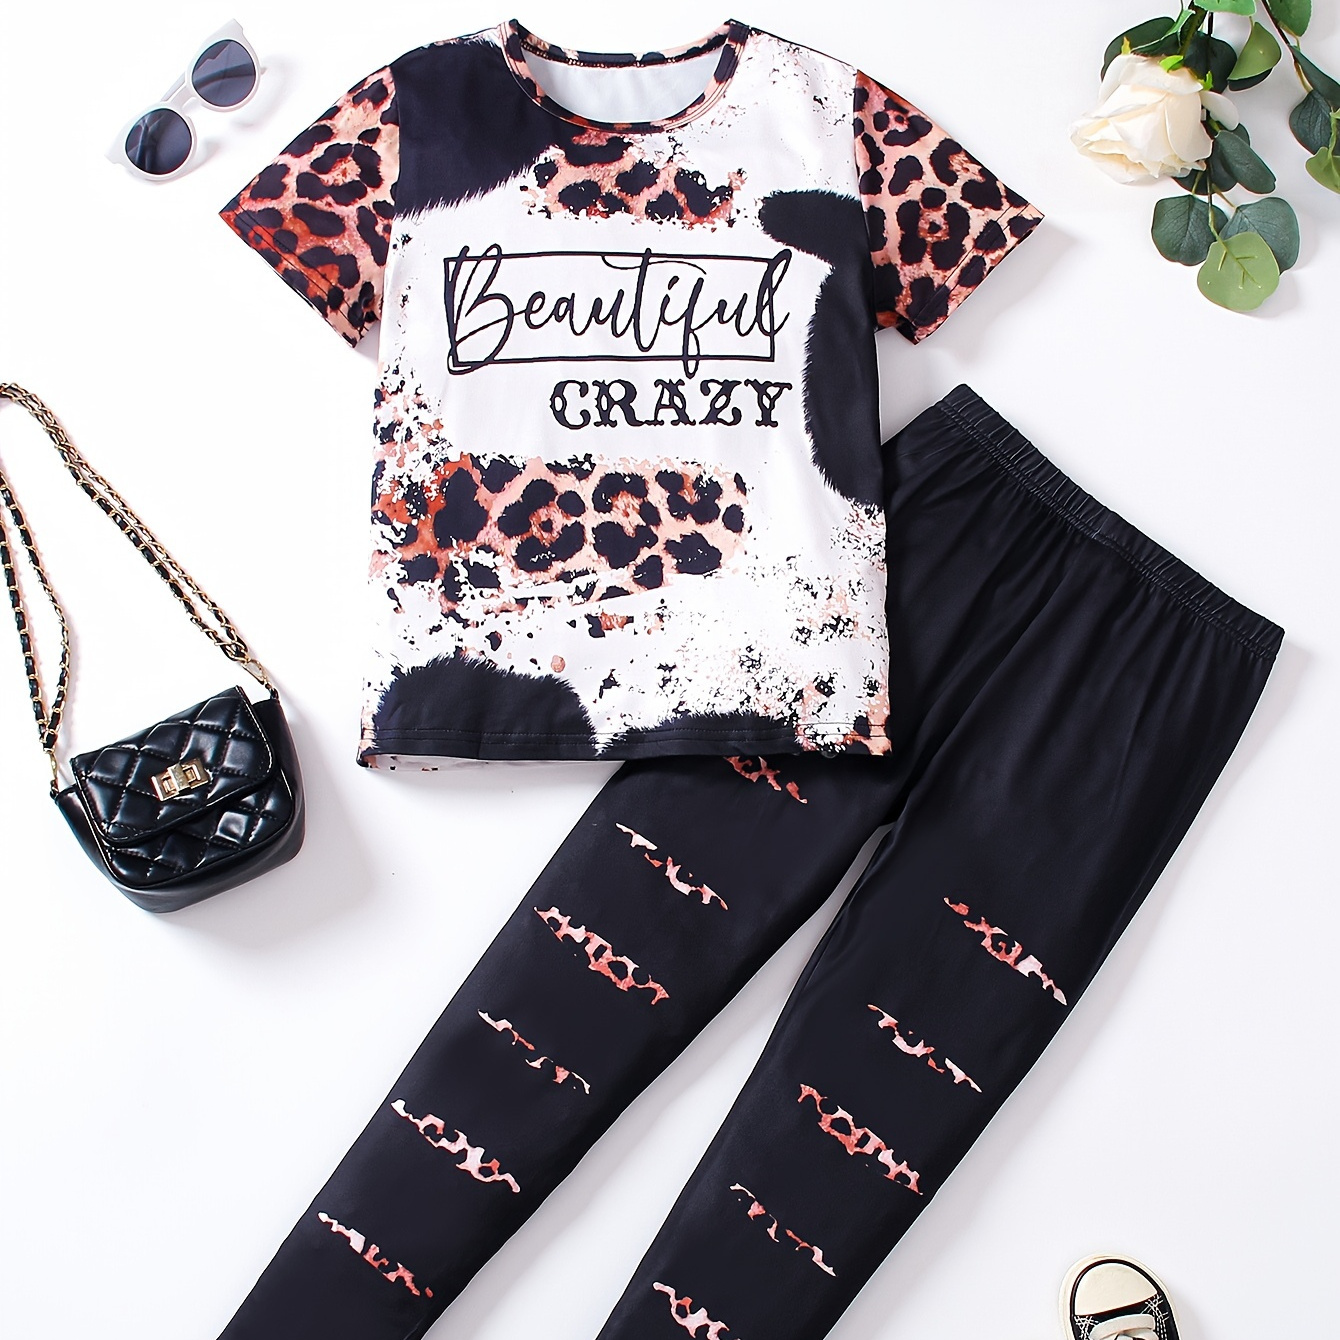 

2-piece Leopard Style Letter T-shirt + Pants Girl's Outfit Co-ords Set - Sweet & Fashion Girls Clothes For Spring/ Summer